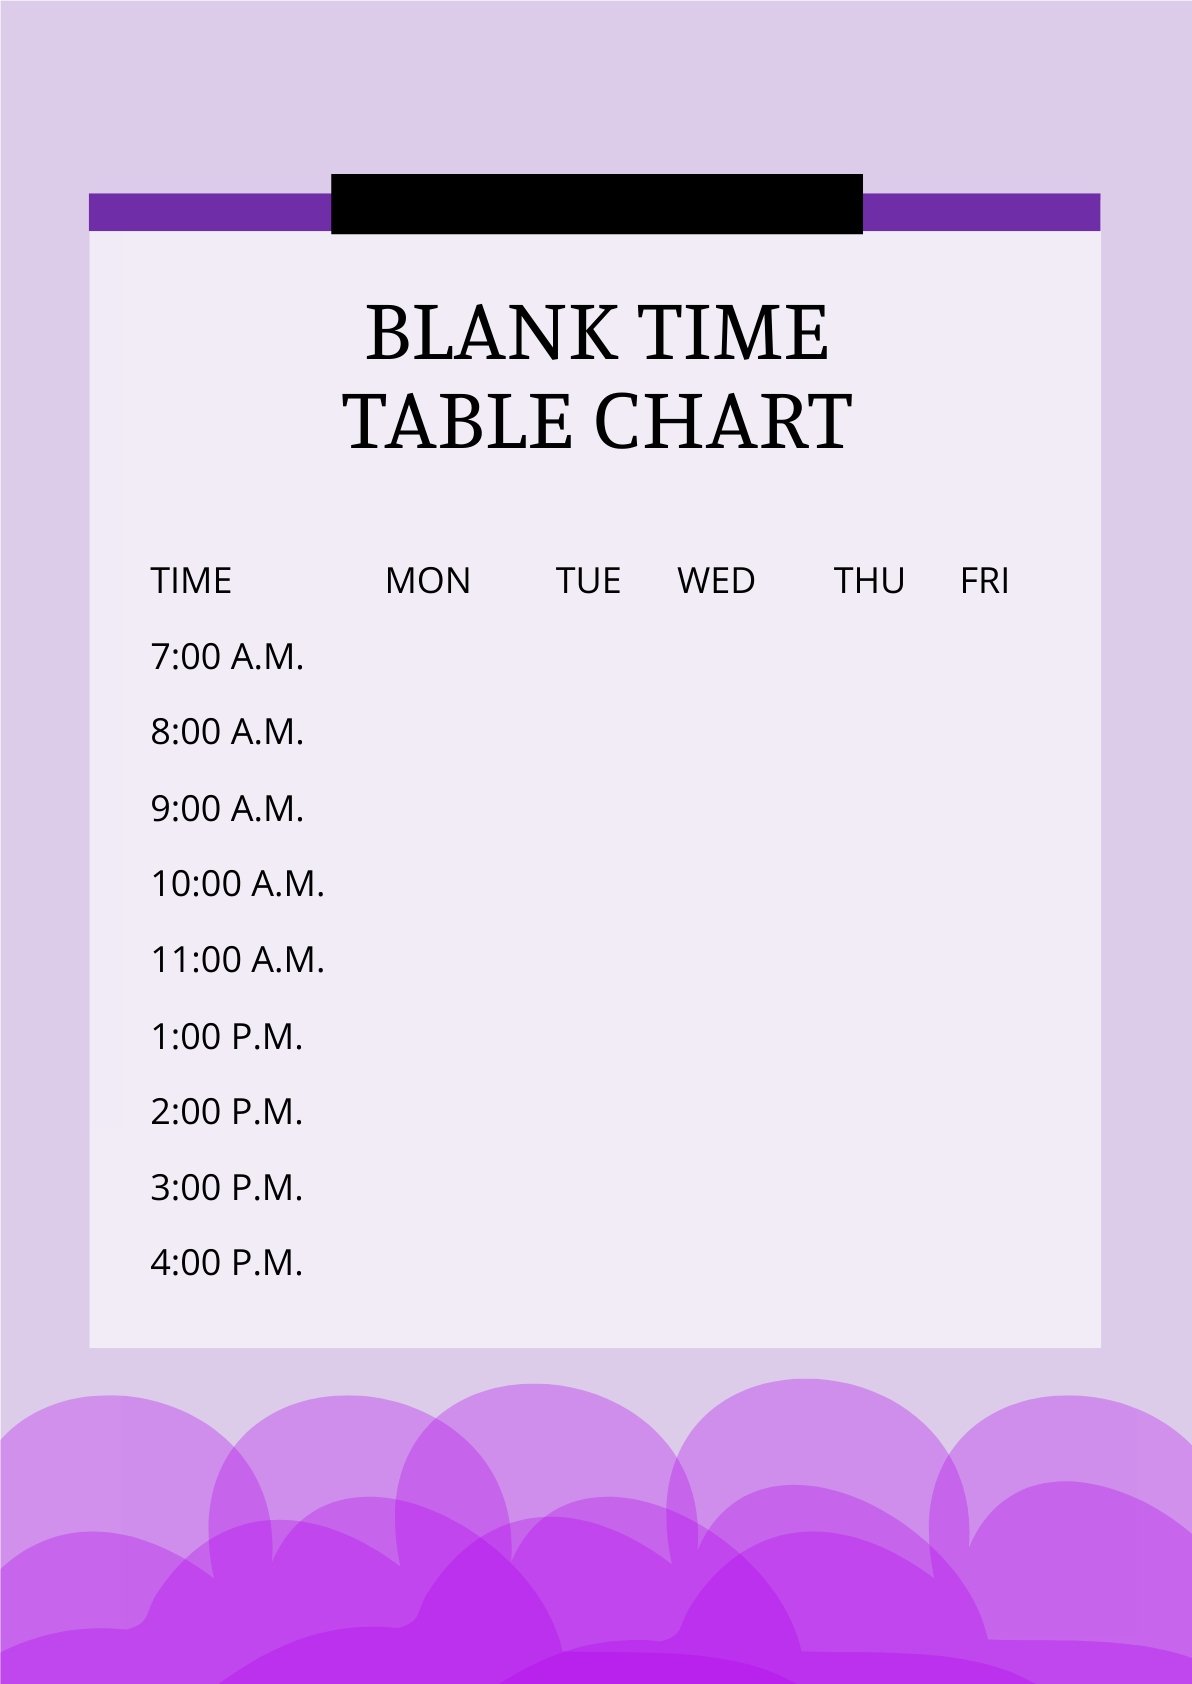 Blank Time Table Chart Template in PDF